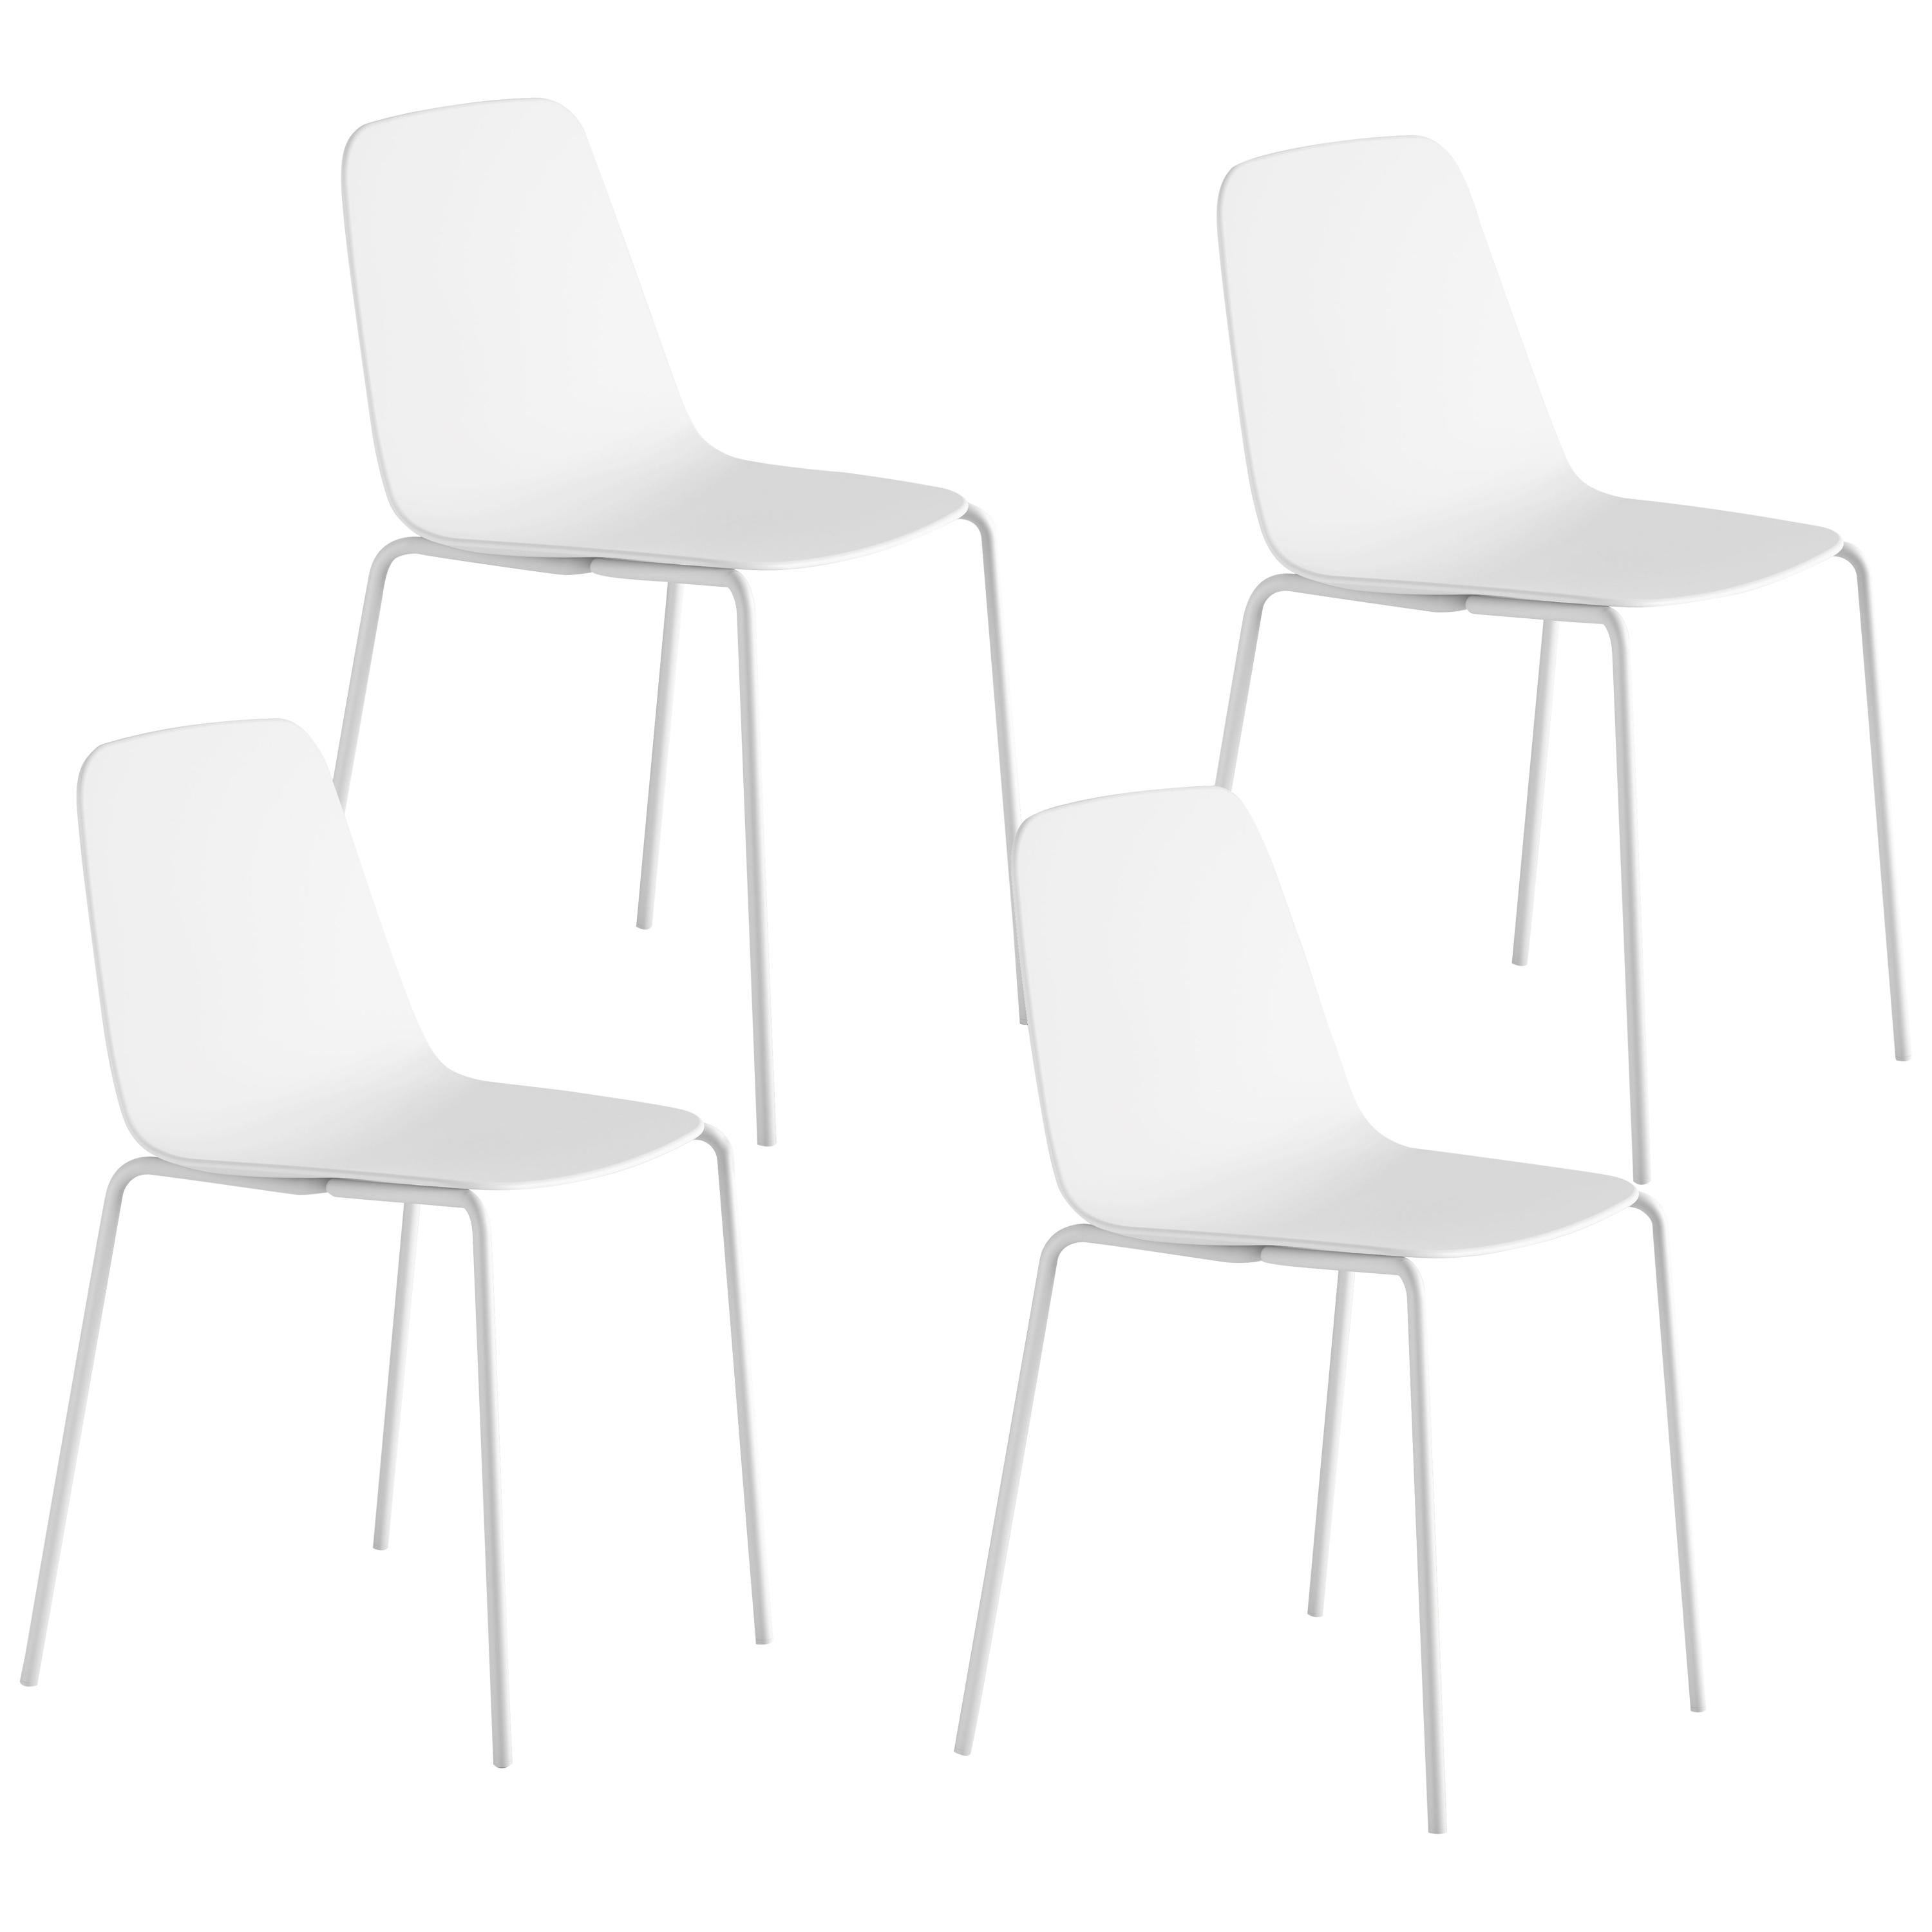 Viccarbe Set 4 Maarten Plastic Chair, Metal Legs, White , by Víctor Carrasco For Sale